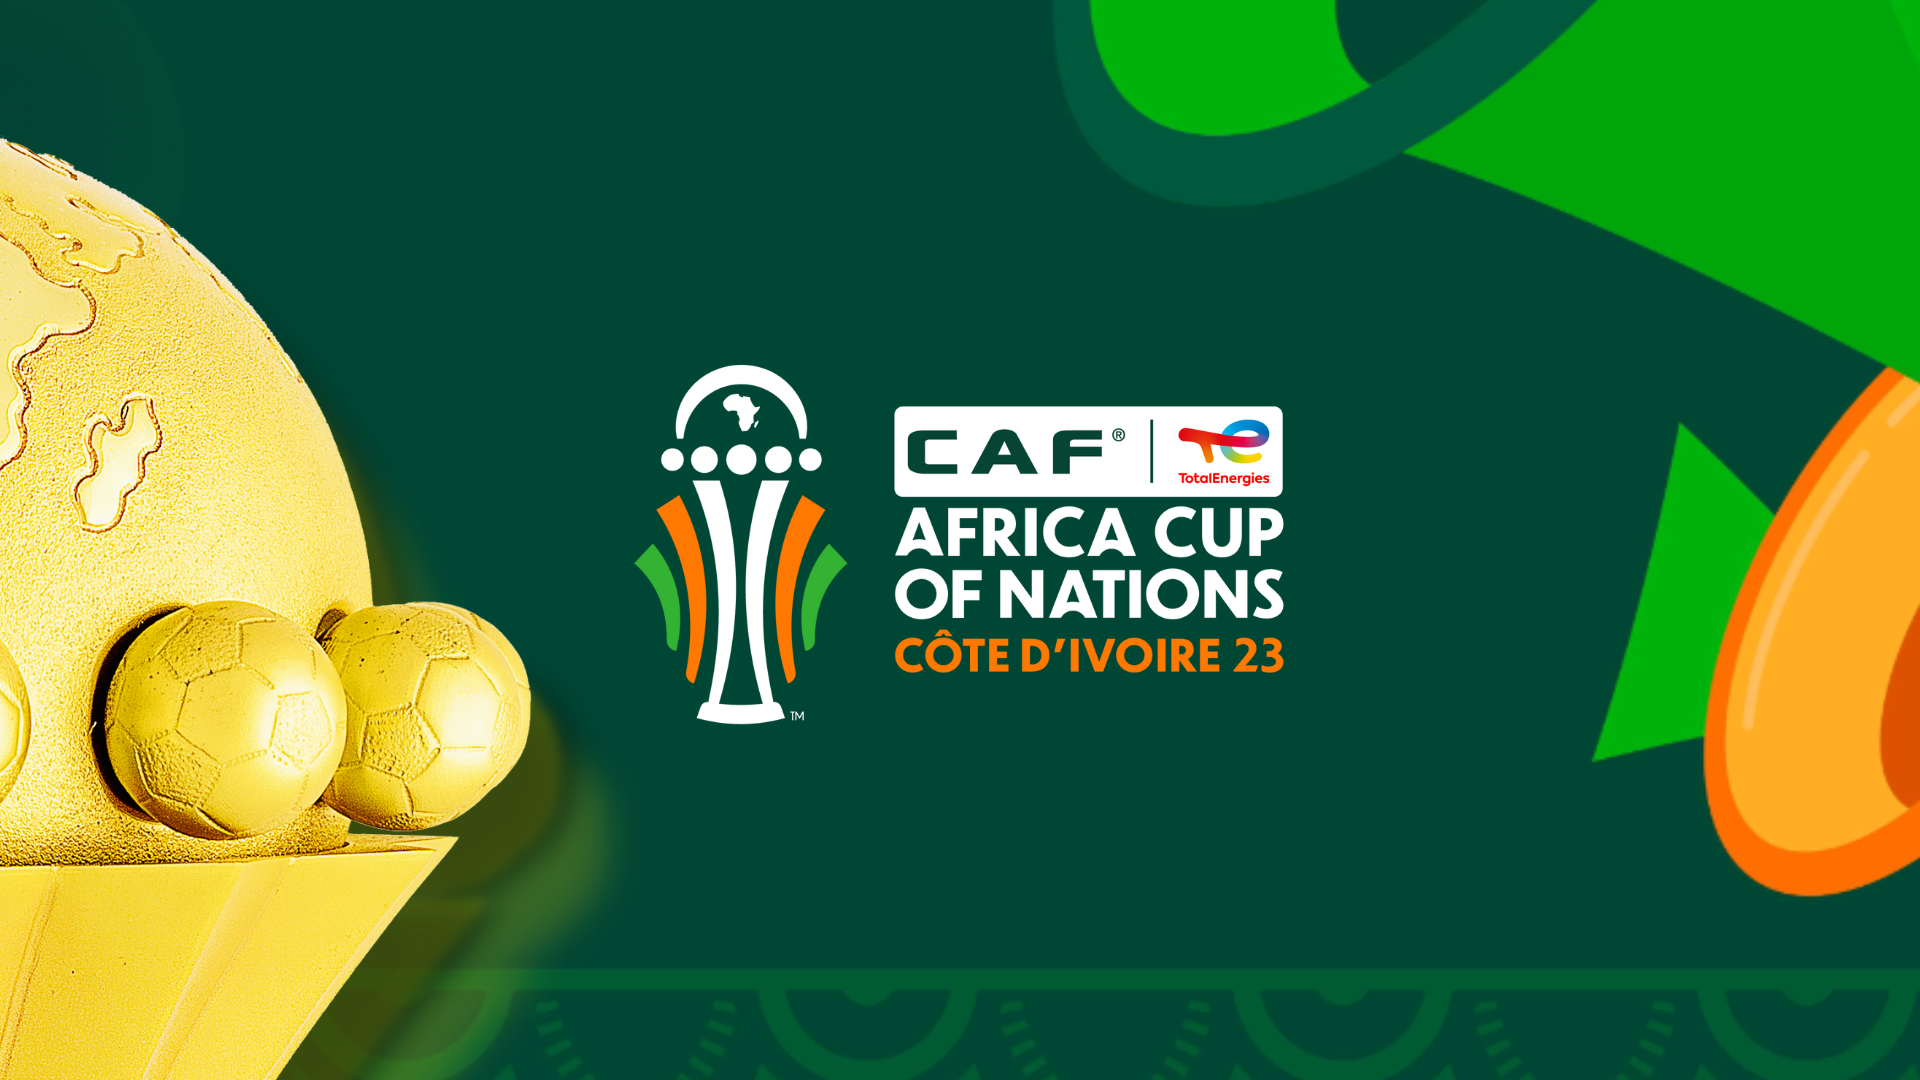 Ivory Coast: Fine-tuning ahead of the Africa Cup of Nations. CAF